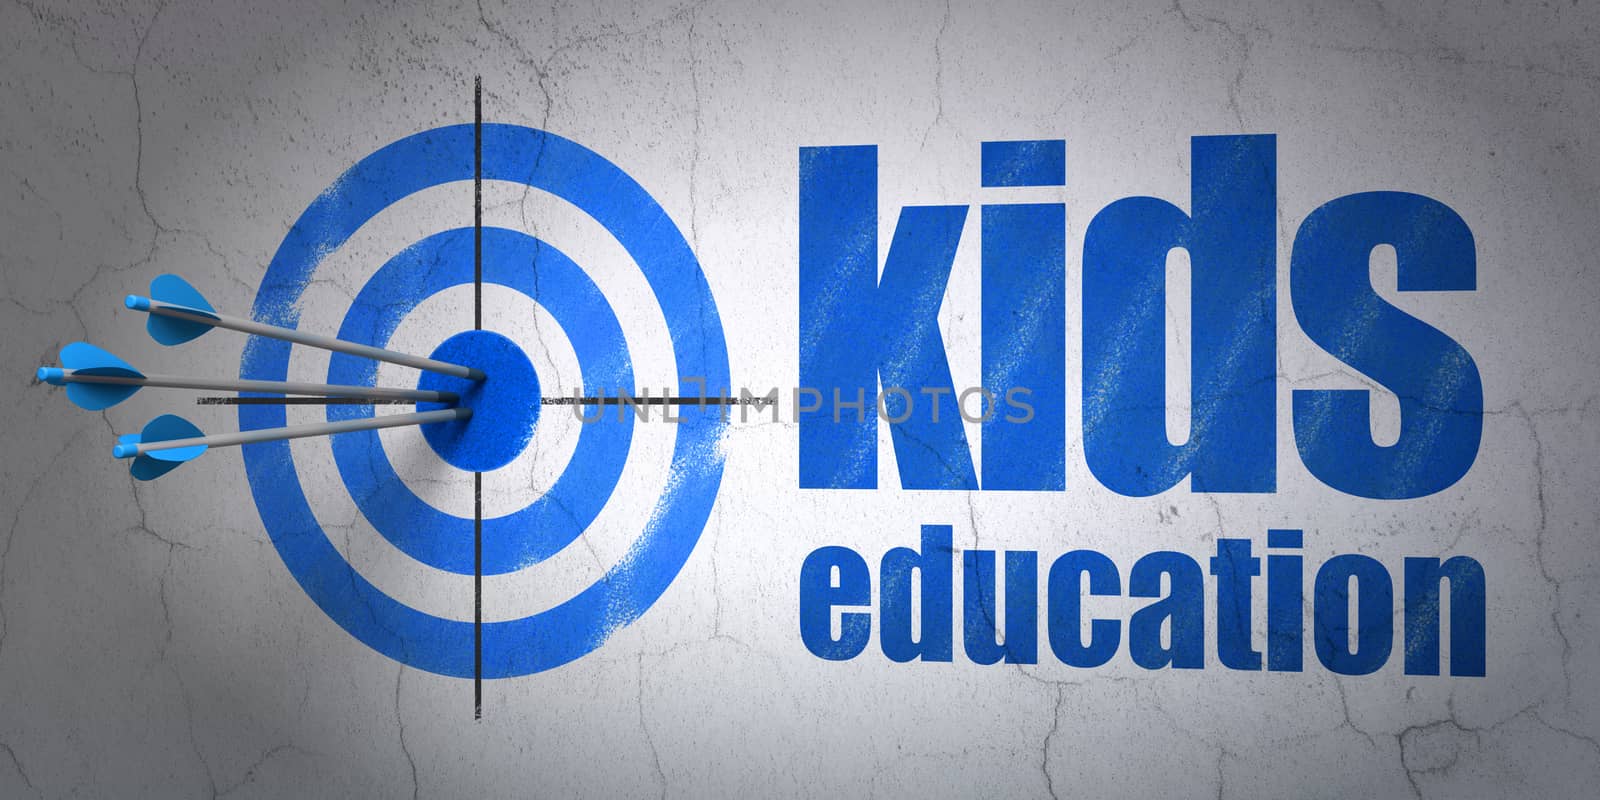 Success Education concept: arrows hitting the center of target, Blue Kids Education on wall background, 3D rendering